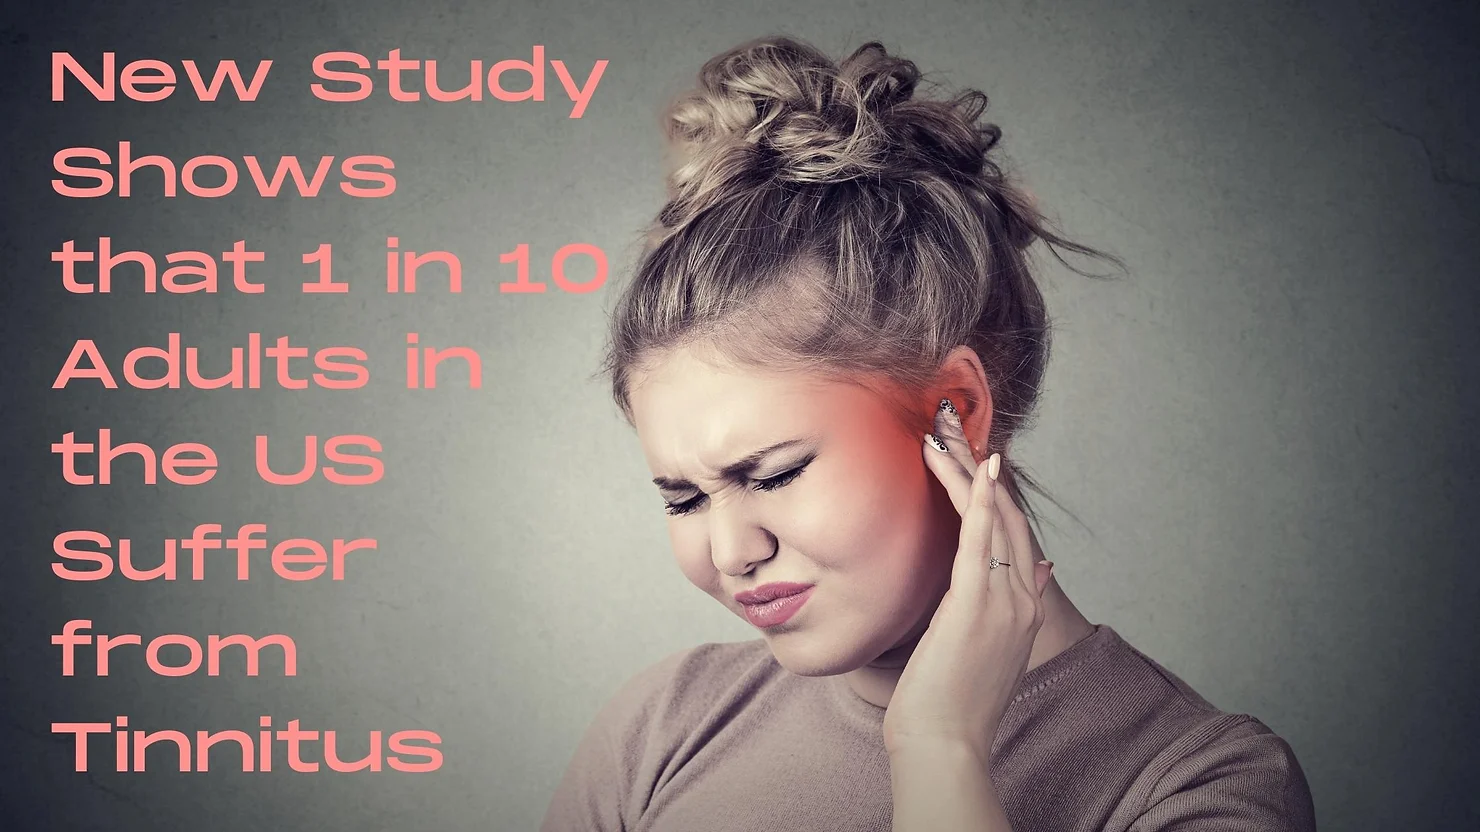 Featured image for “New Study Shows that 1 in 10 Adults in the U.S. Suffer from Tinnitus”